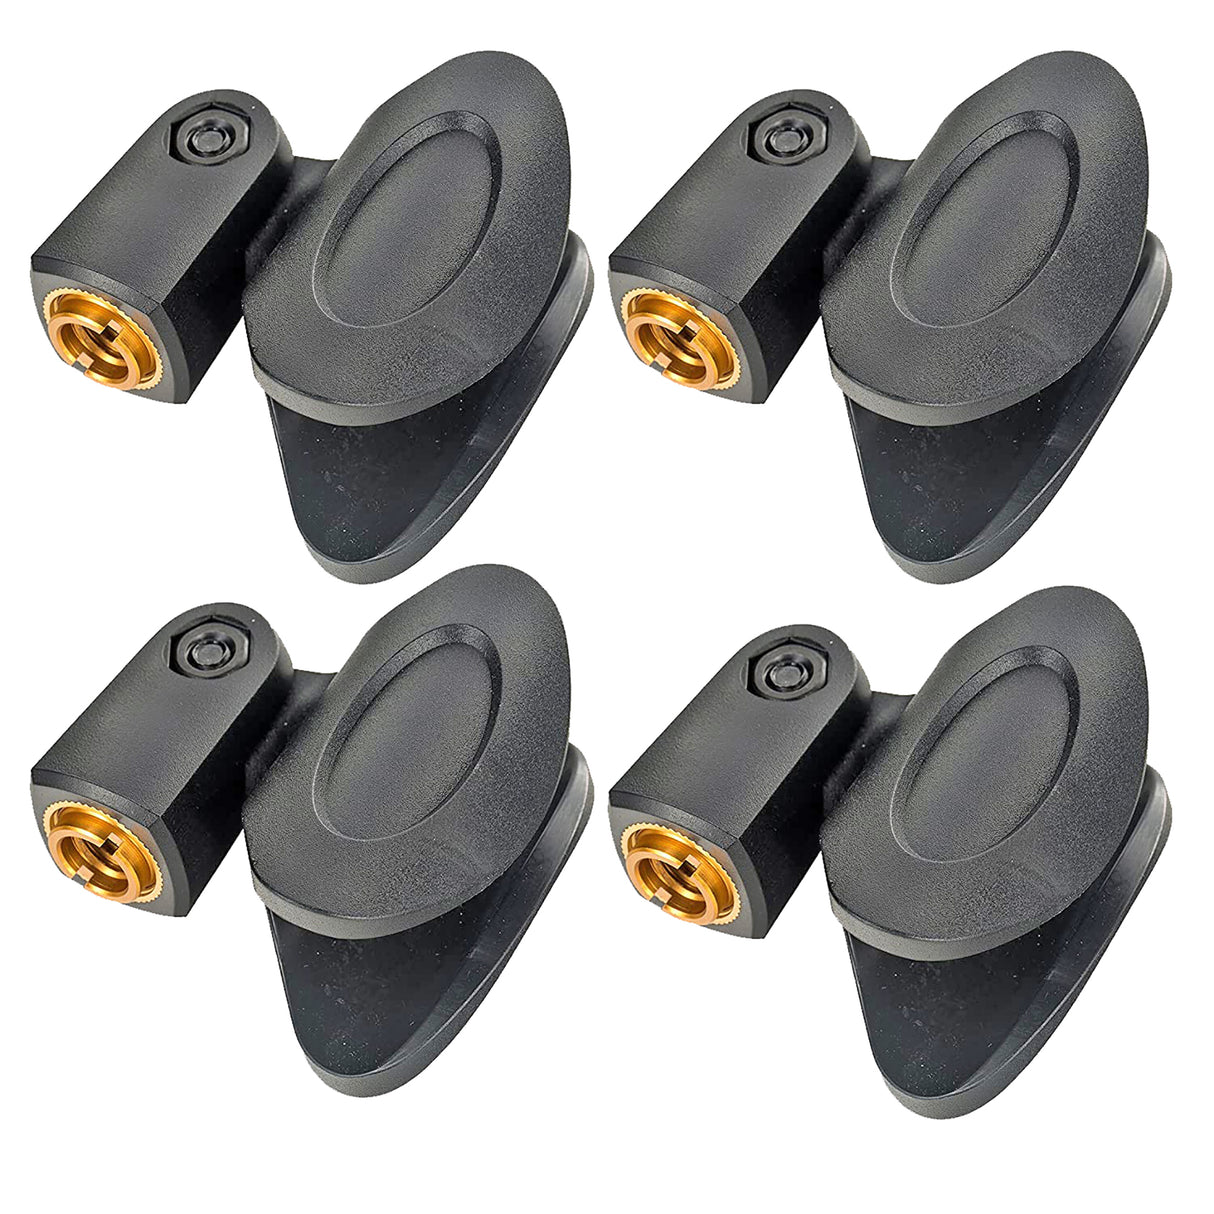 5 Core 4 Pieces Black Universal Nut Adapter Microphone Clip Clamp Holder For All Mic stand MC 02 4PCS